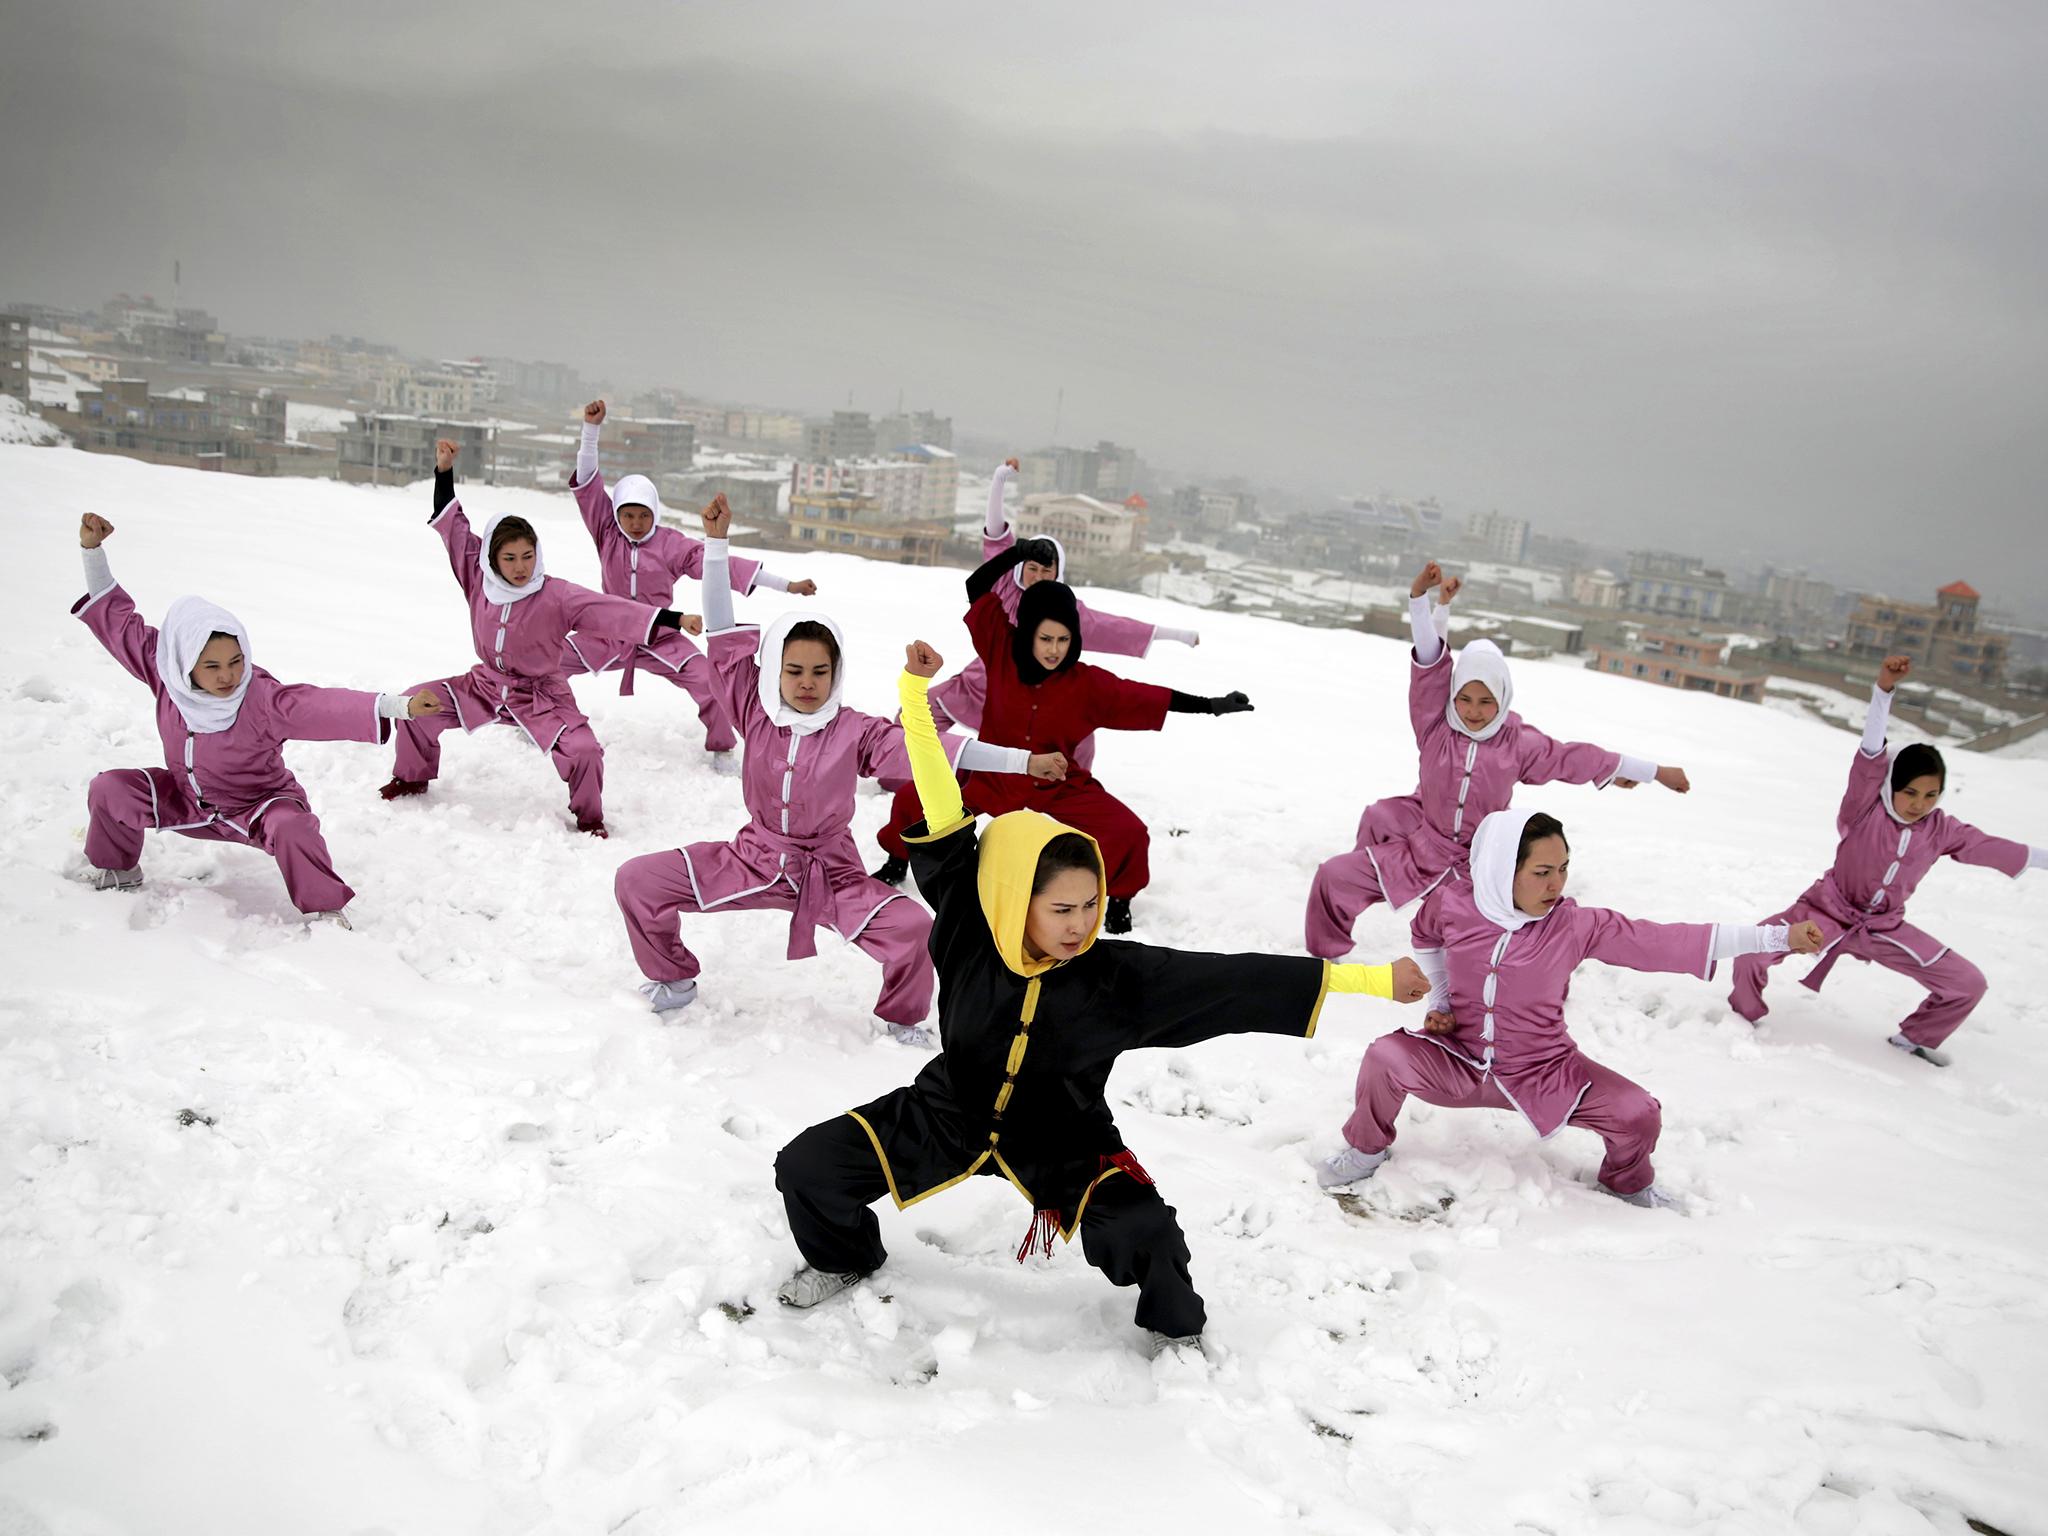 Shaolin martial arts students follow their trainer, Sima Azimi, 20, in black, during a training session on a hilltop in Kabul, Afghanistan